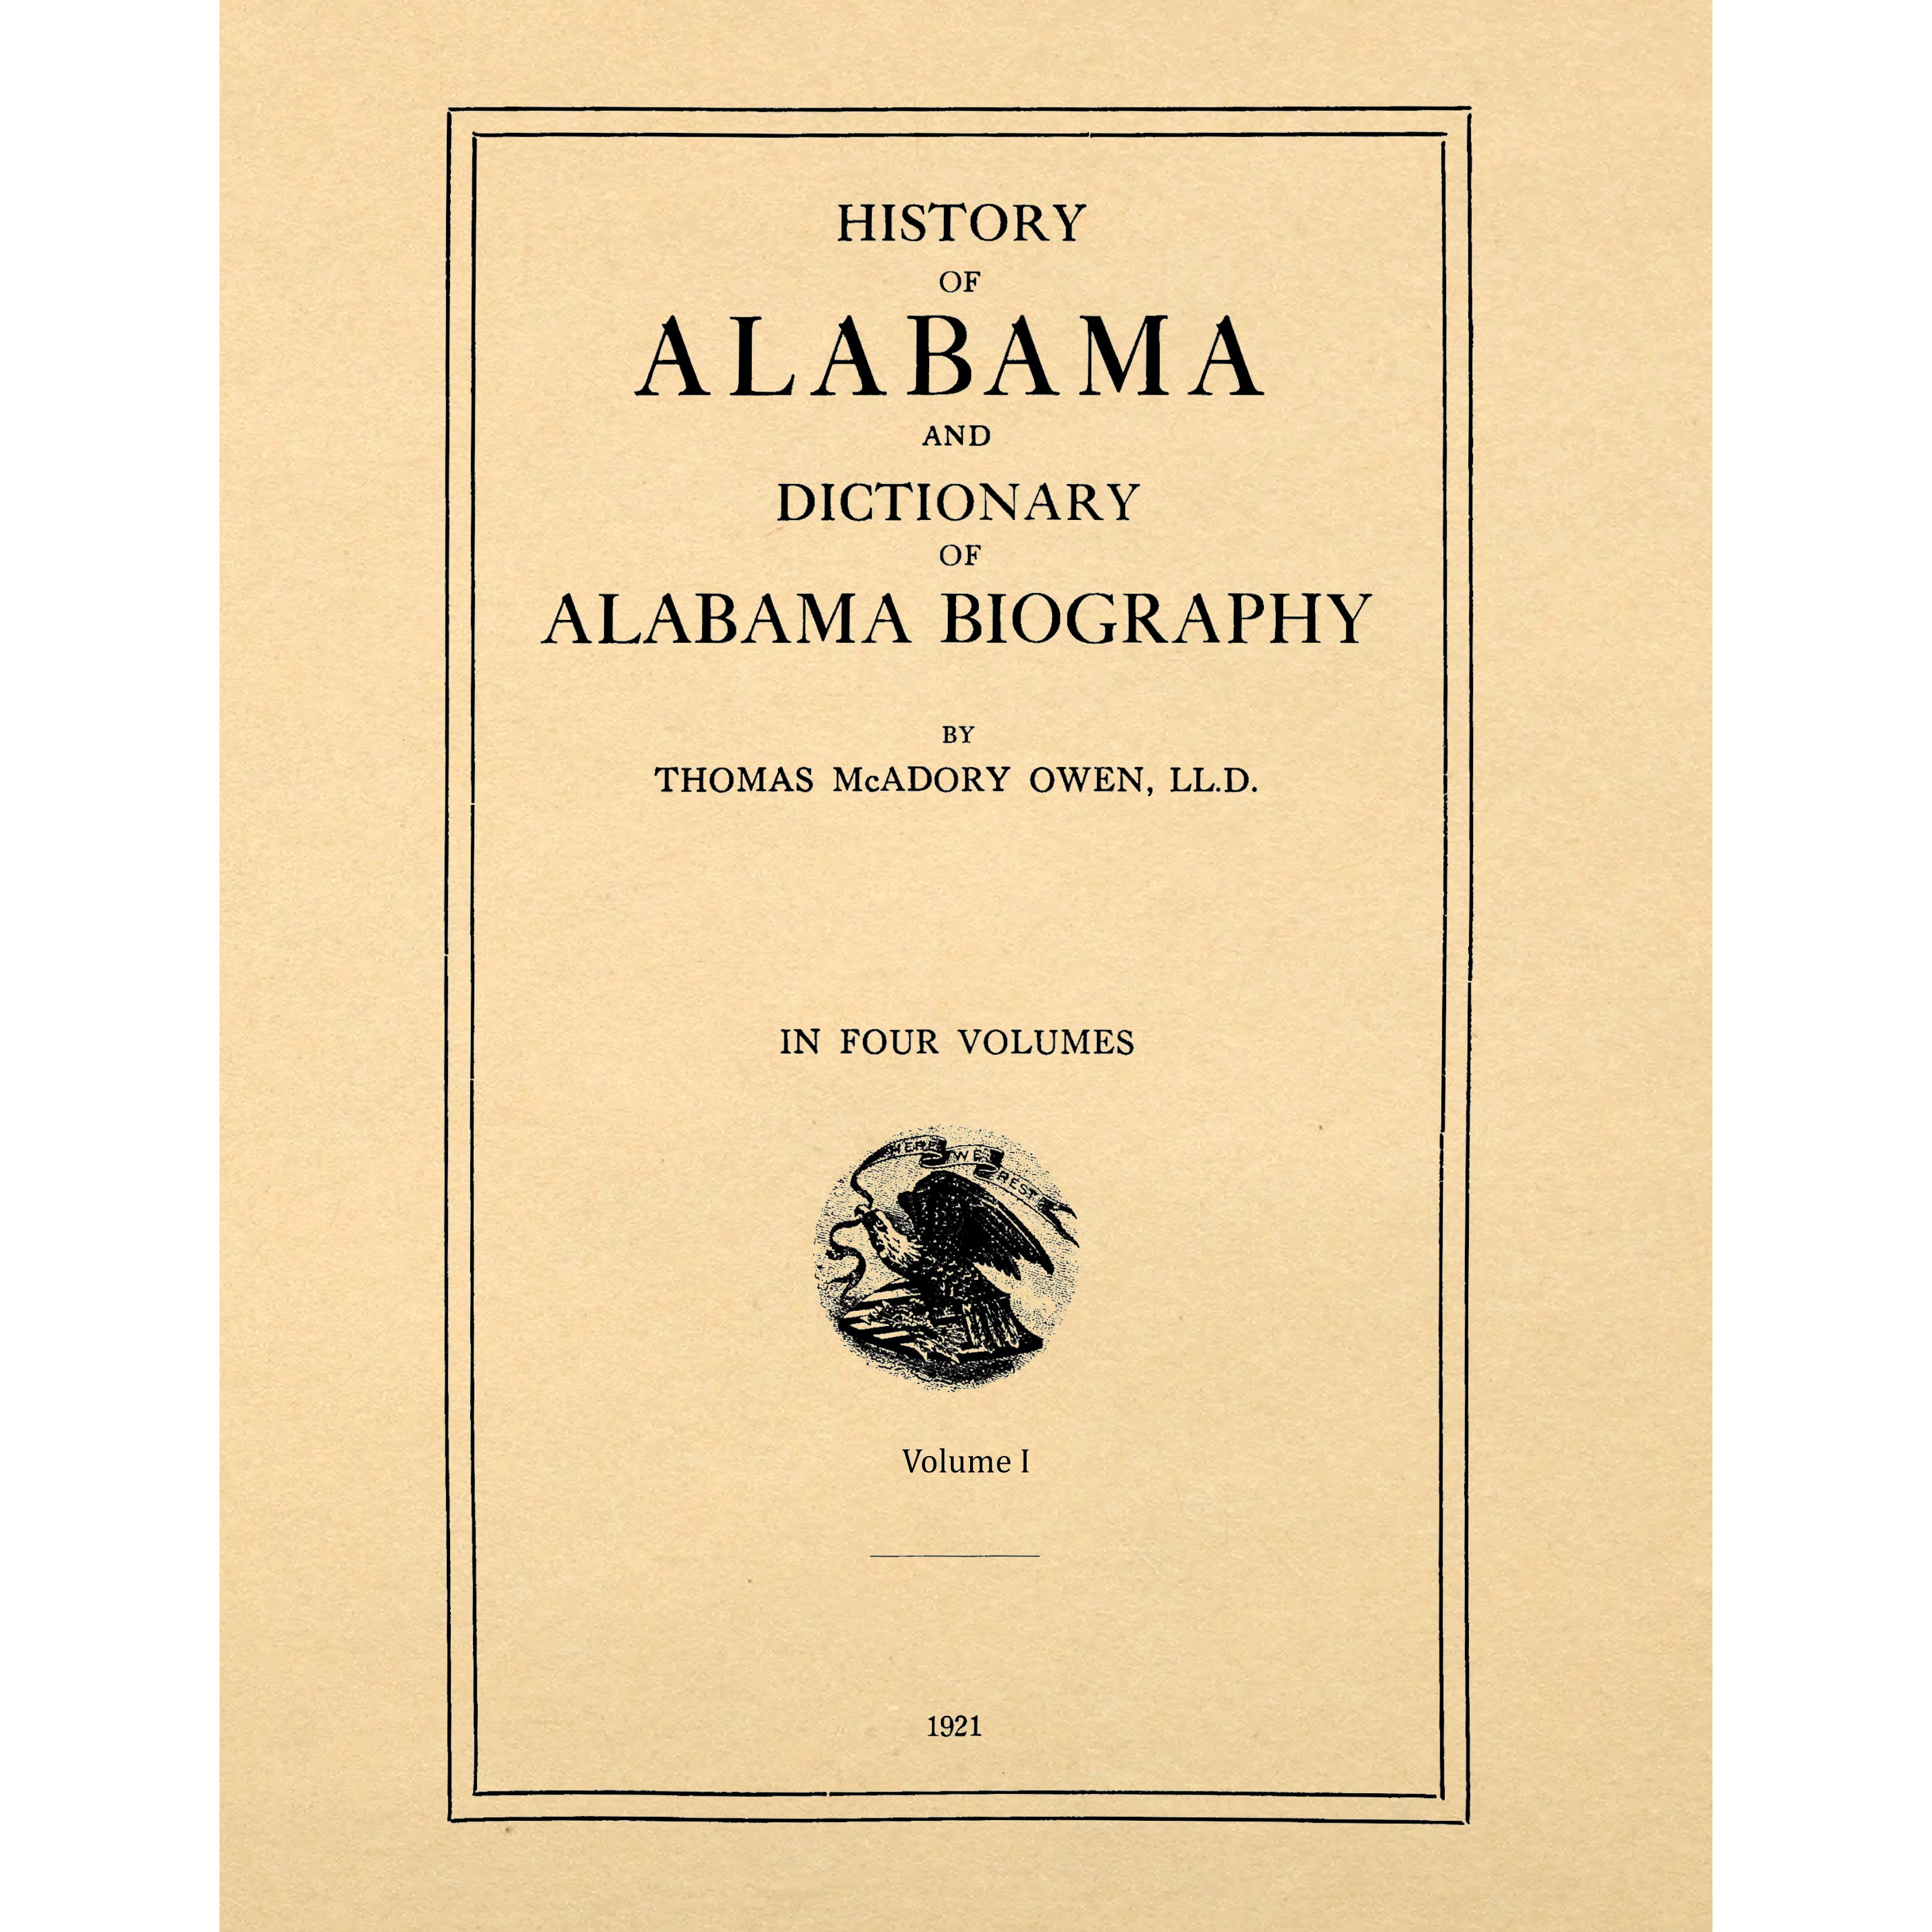 History of Alabama and dictionary of Alabama biography in 2 Volumes